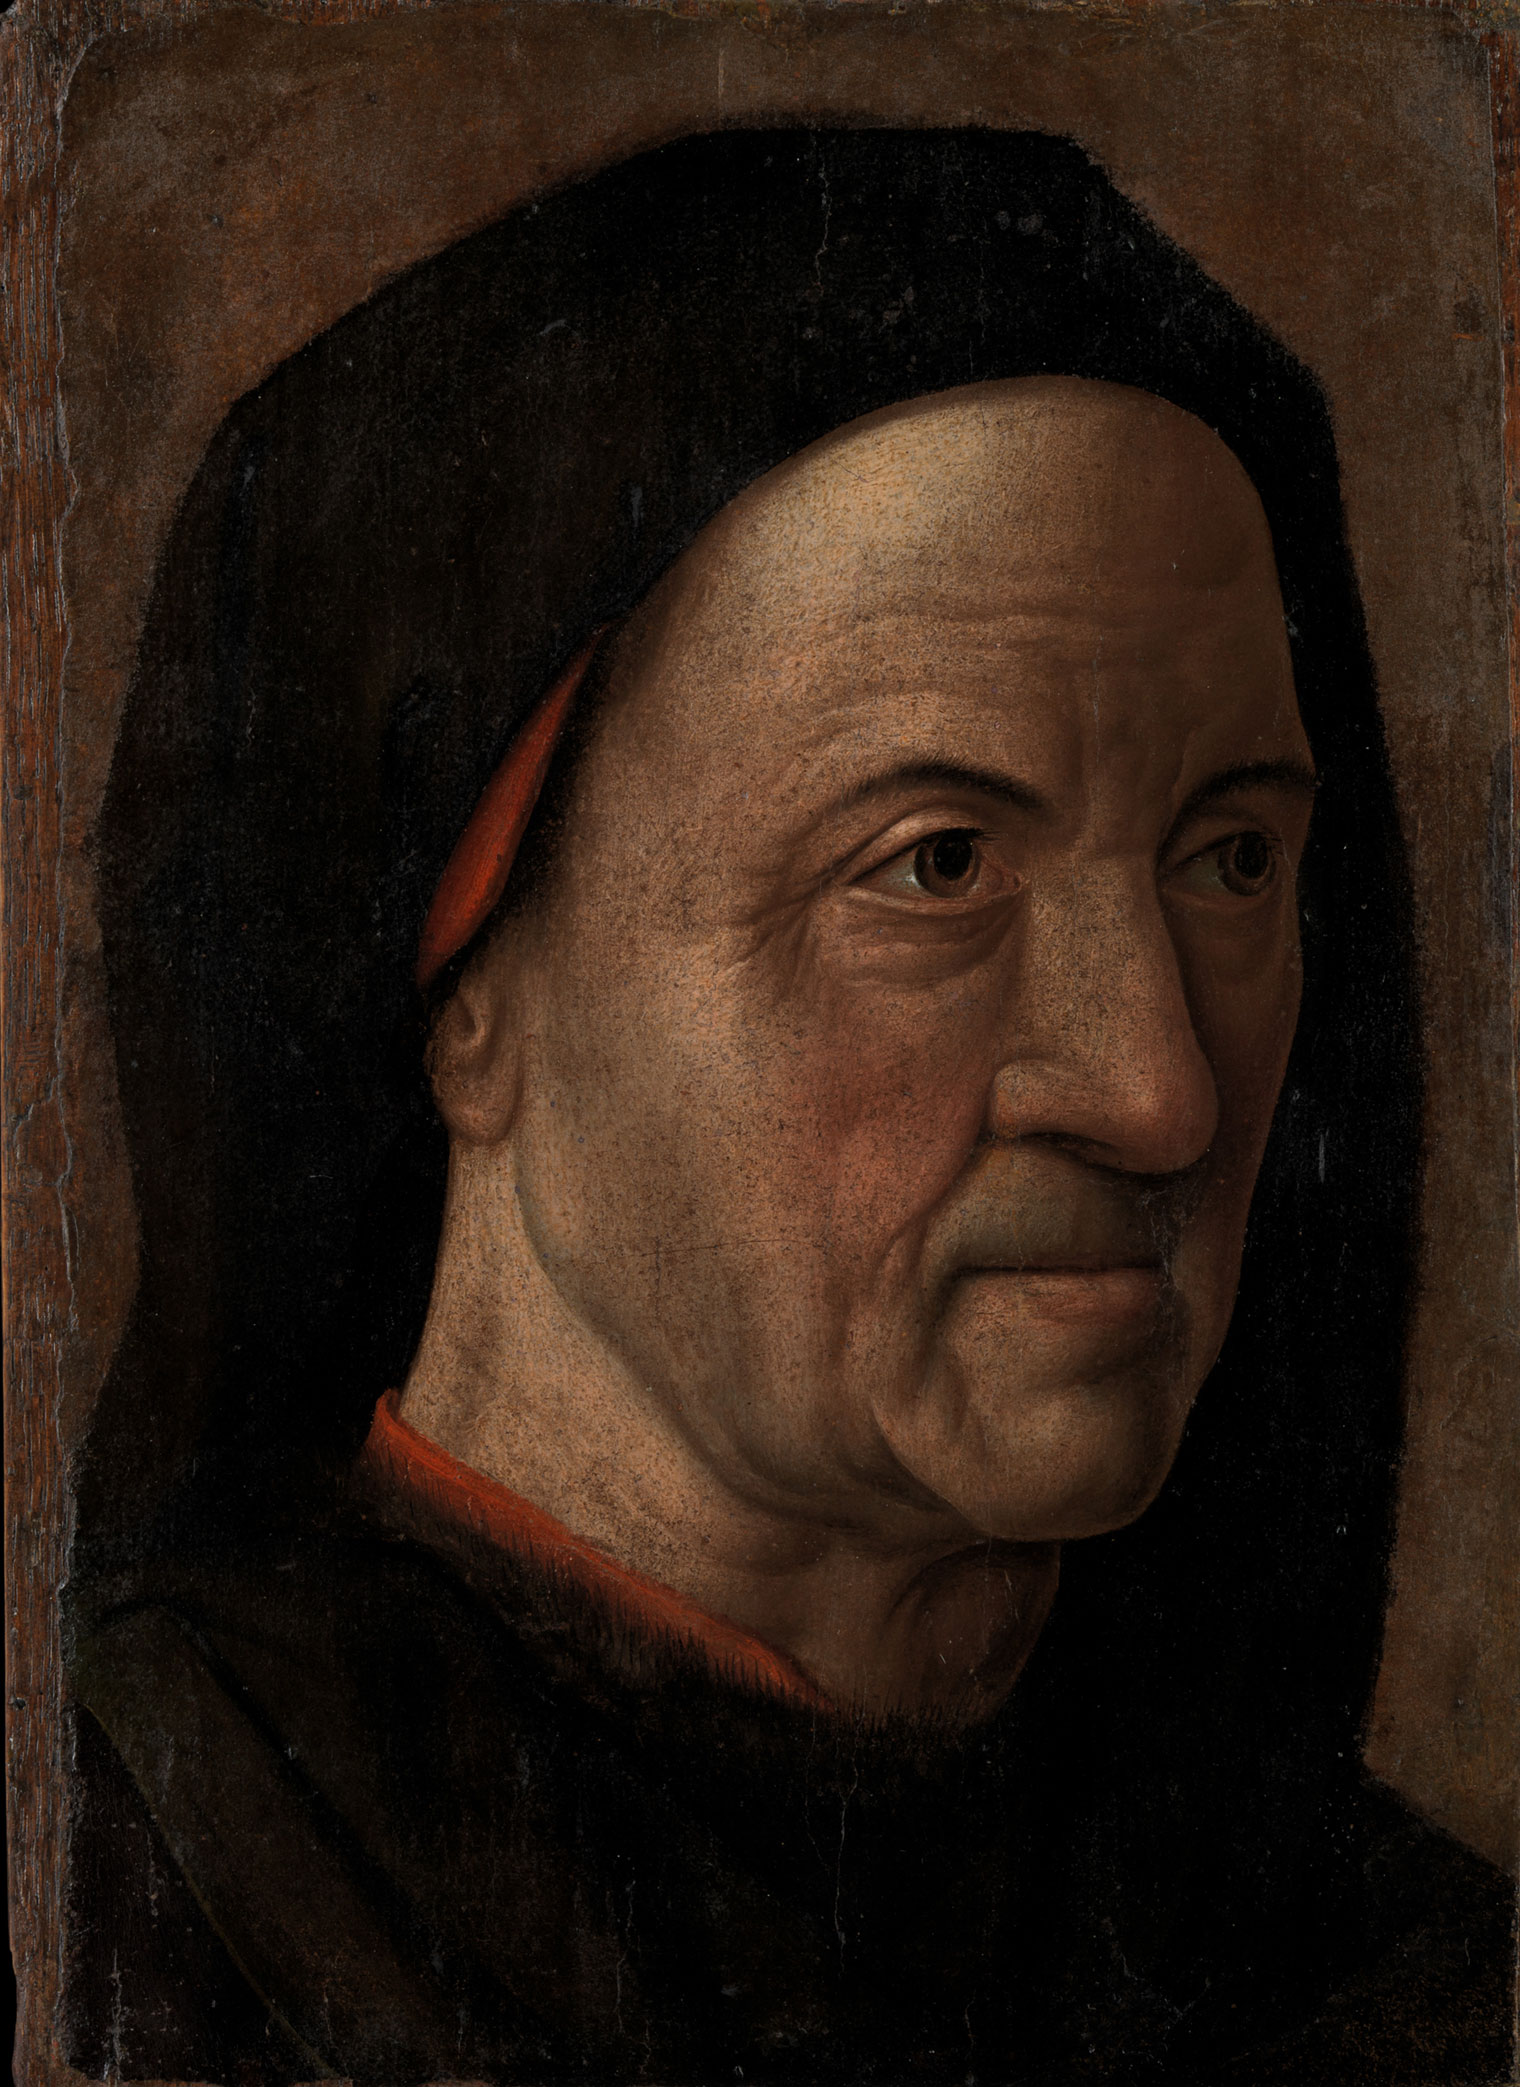 A detail of a portrait by Hugo van der Goes depicting a wrinkled old man wearing a black cloak with a red garment underneath in front of a uniform brown background.